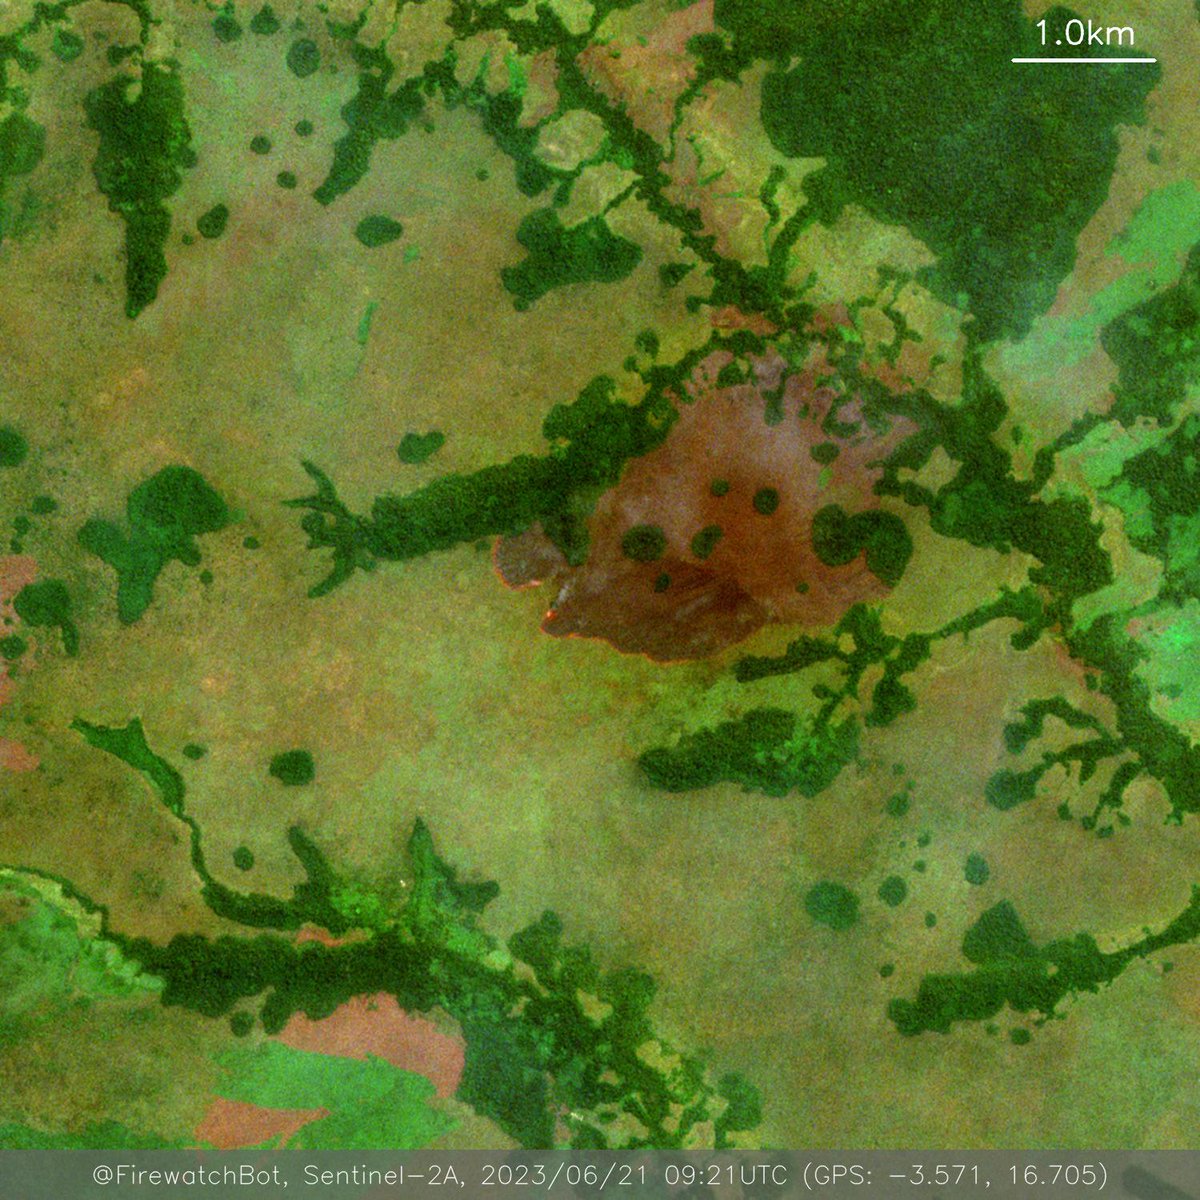 Fire detected from #Sentinel2

🗺 Place: Kwamouth, Mai-Ndombe, #DemocraticRepublicoftheCongo
🕛 Date: 2023/06/21 09:21UTC

View location: maps.google.com/?q=-3.57096851… (-3.571, 16.705)